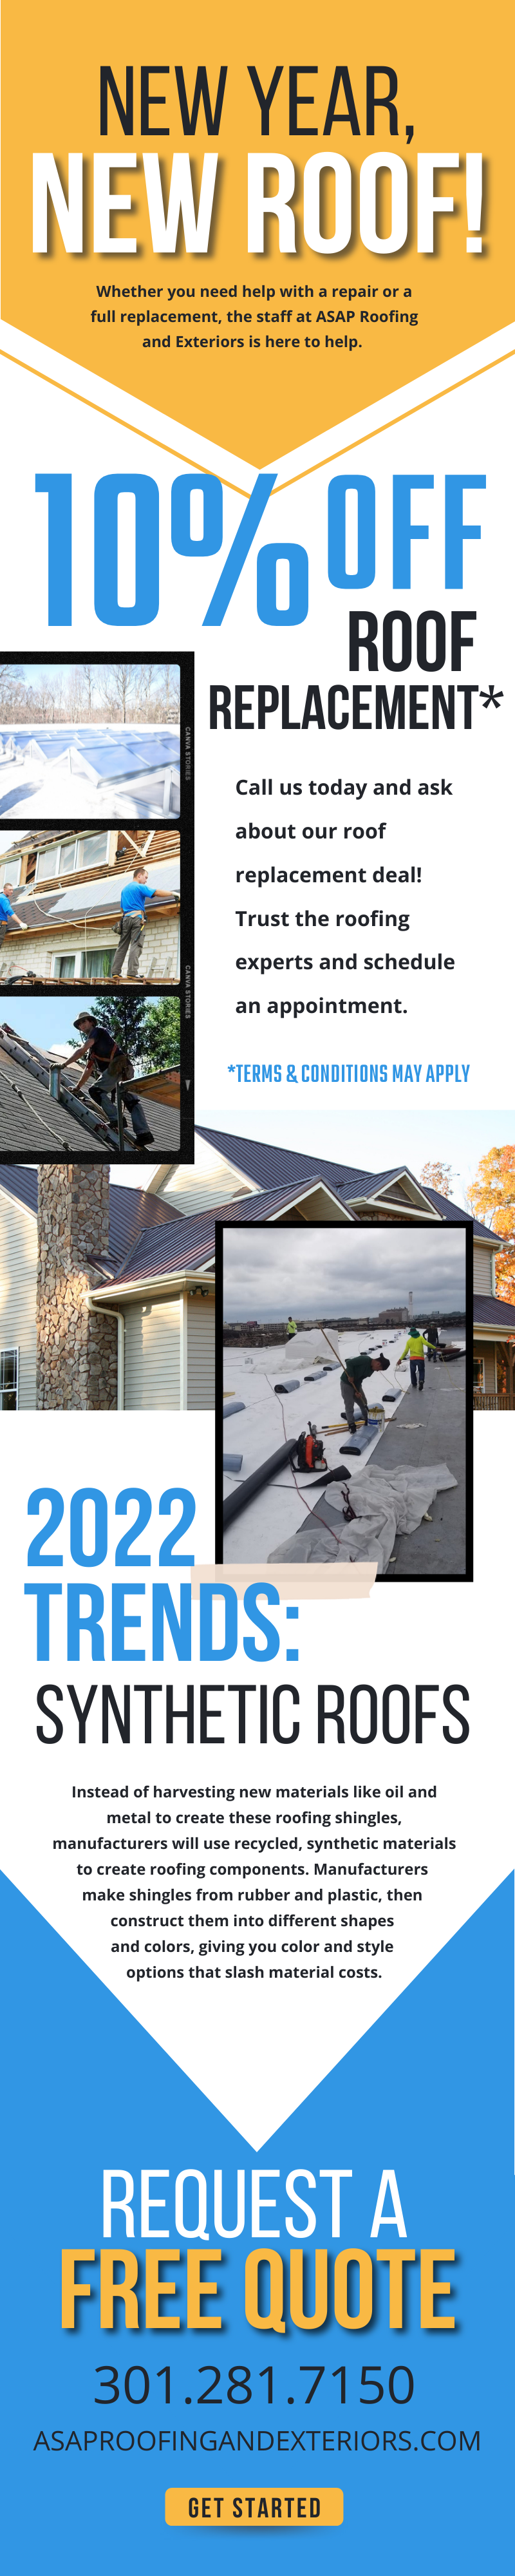 ASAP Roofing Exteriors January 2022